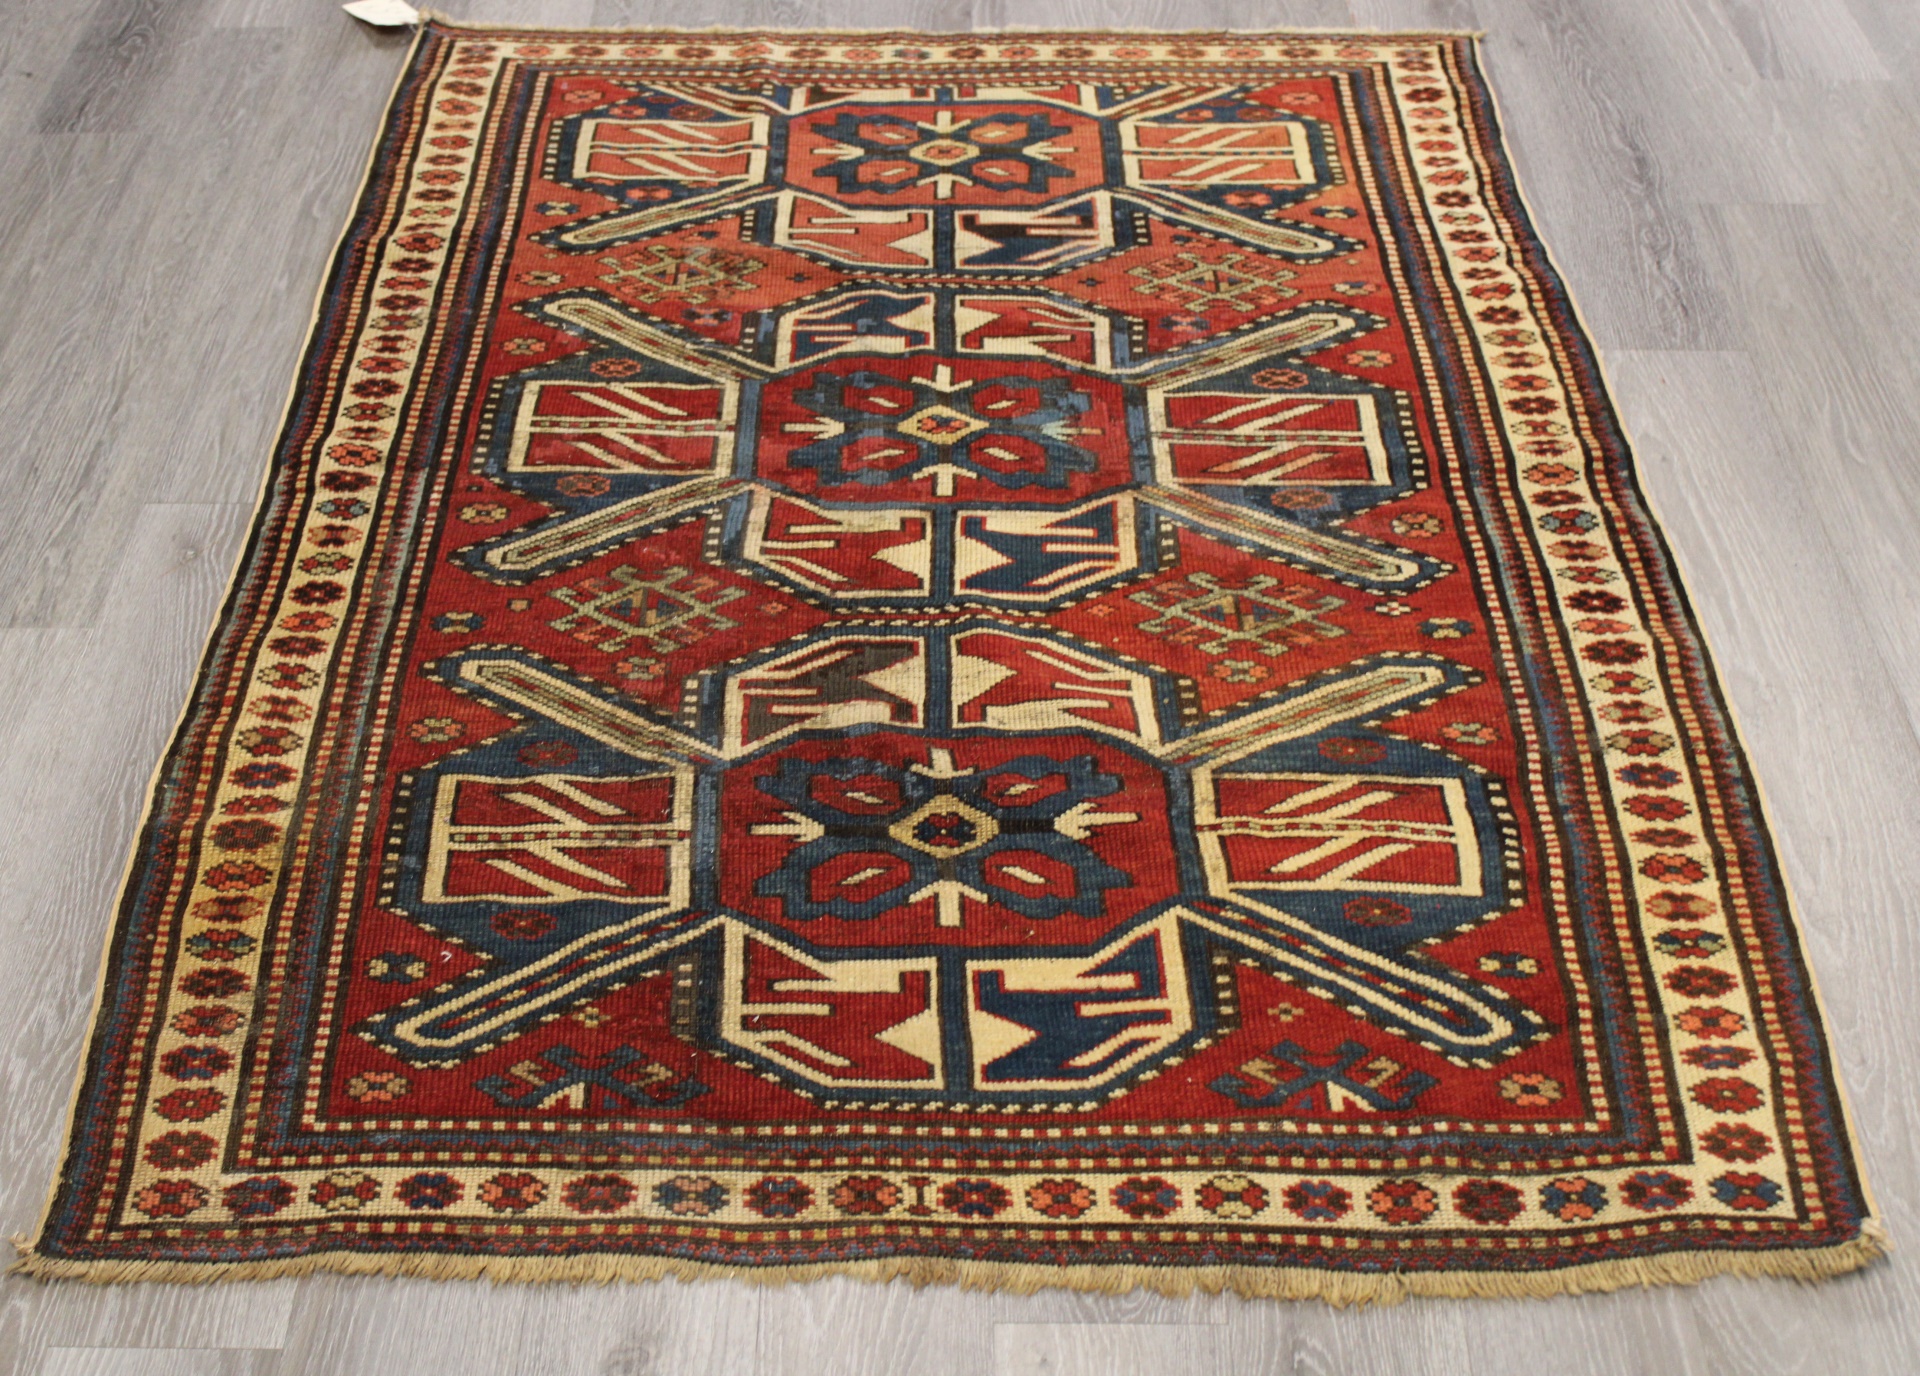 ANTIQUE AND FINELY HAND WOVEN KAZAK